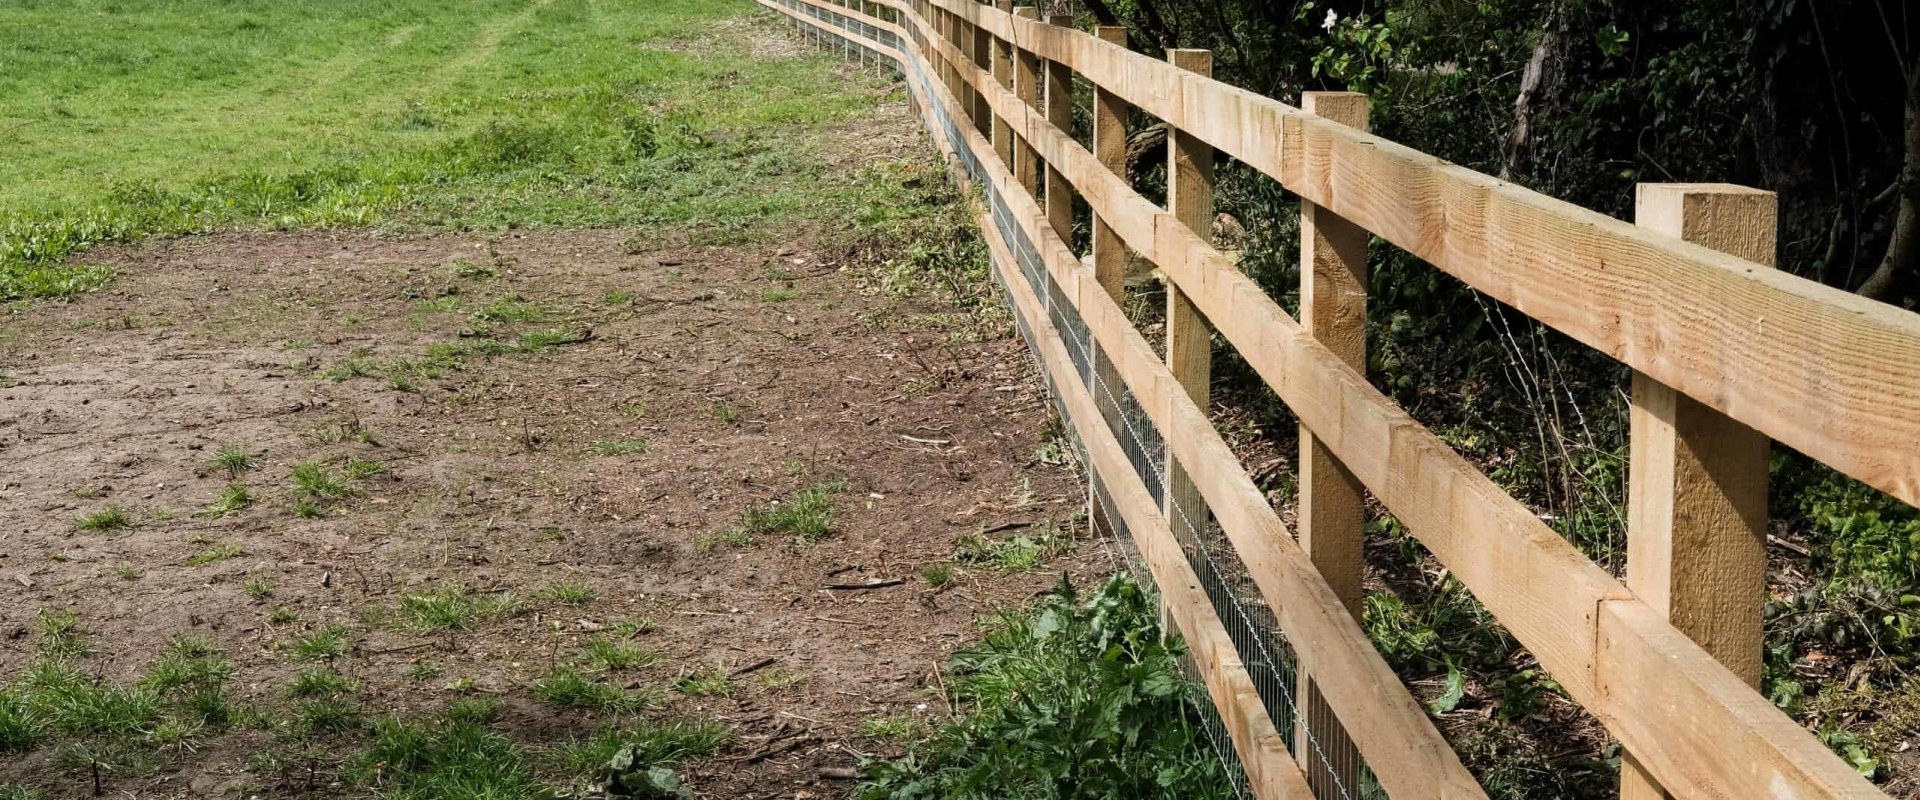 How Deep Should I Dig Fence Post Holes for Maximum Stability?